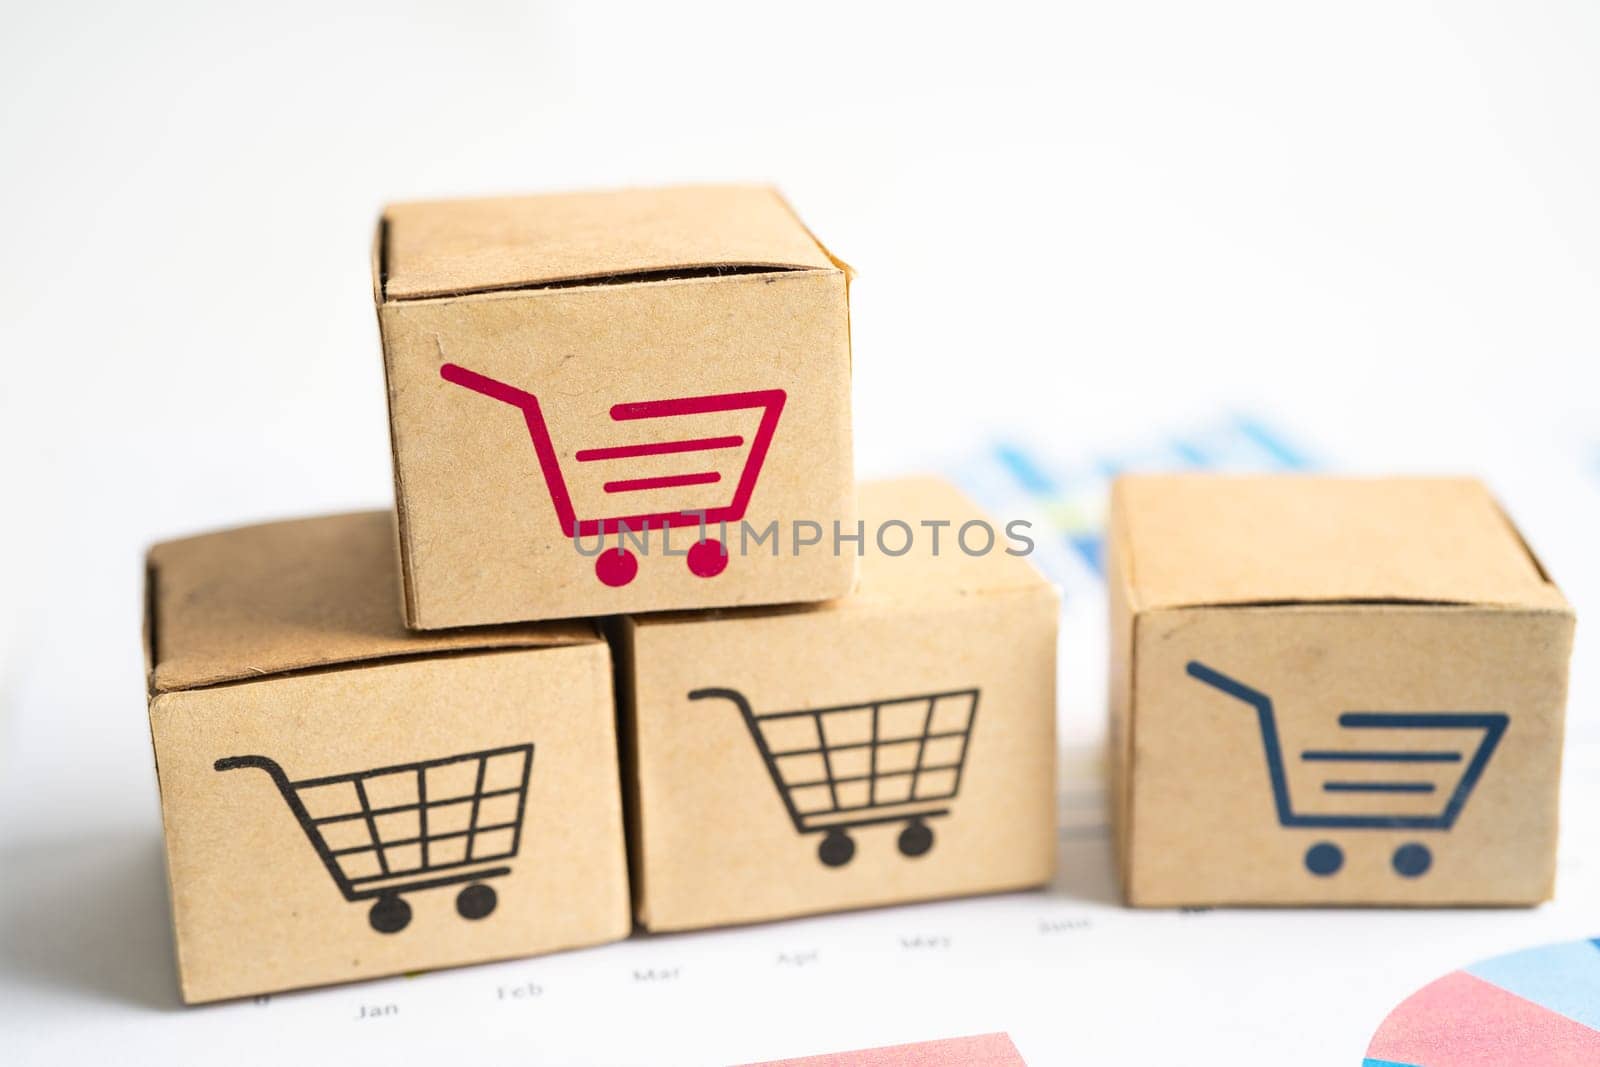 Shopping cart logo on box on graph background. Banking Account, Investment Analytic research data economy, trading, Business import export transportation online company concept.